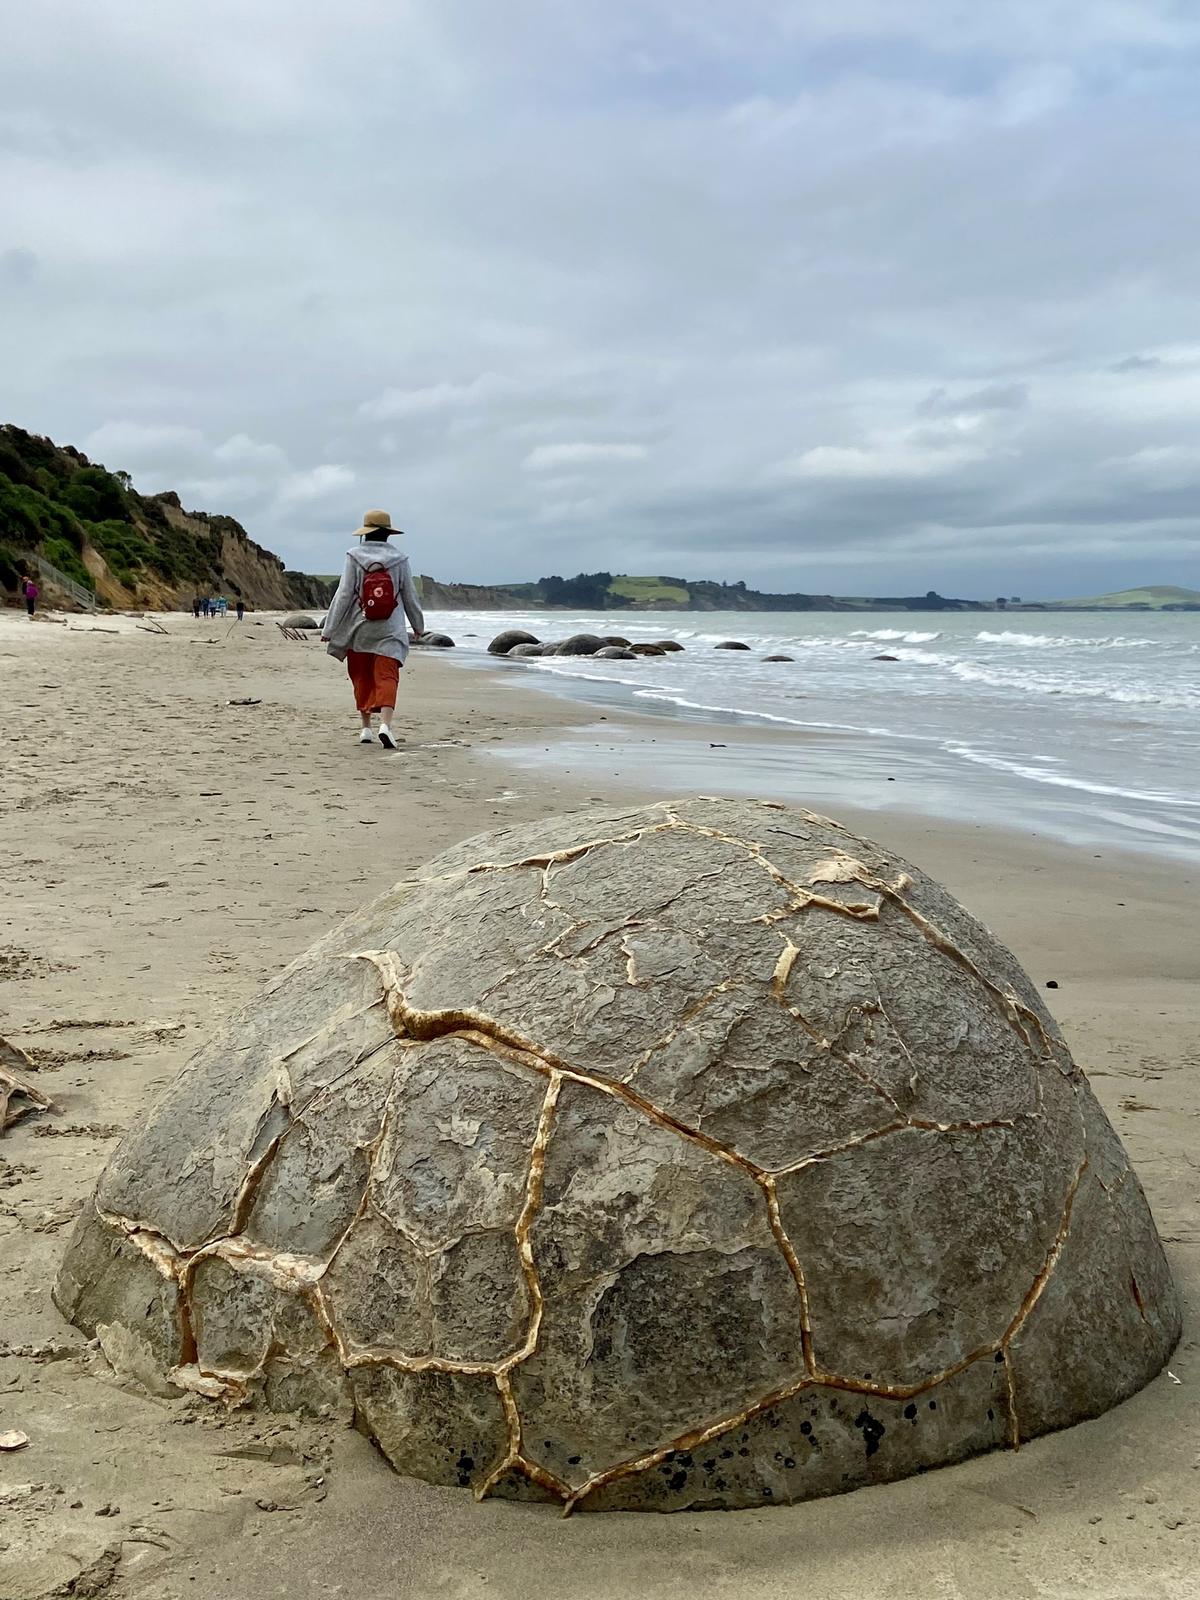 The Moeraki Boulders, unusually large spherical boulders spread out along a section of the Otago coast, in New Zealand on Dec. 6, 2022. (Daniel Teng/The Epoch Times)